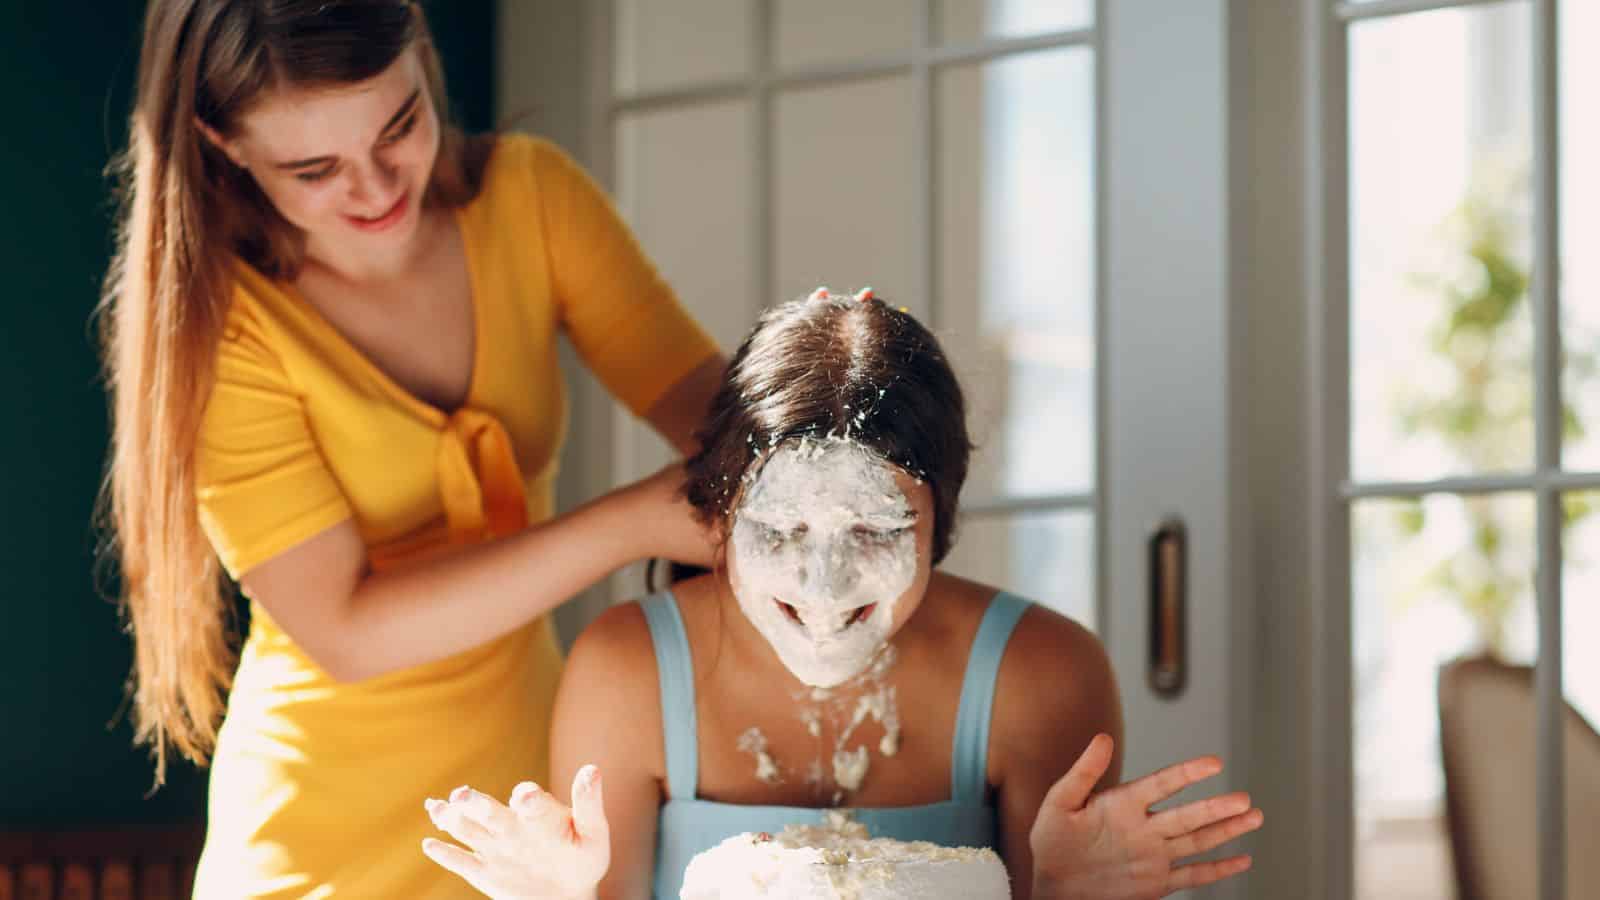 Pushing Someone_s Face Into a Cake